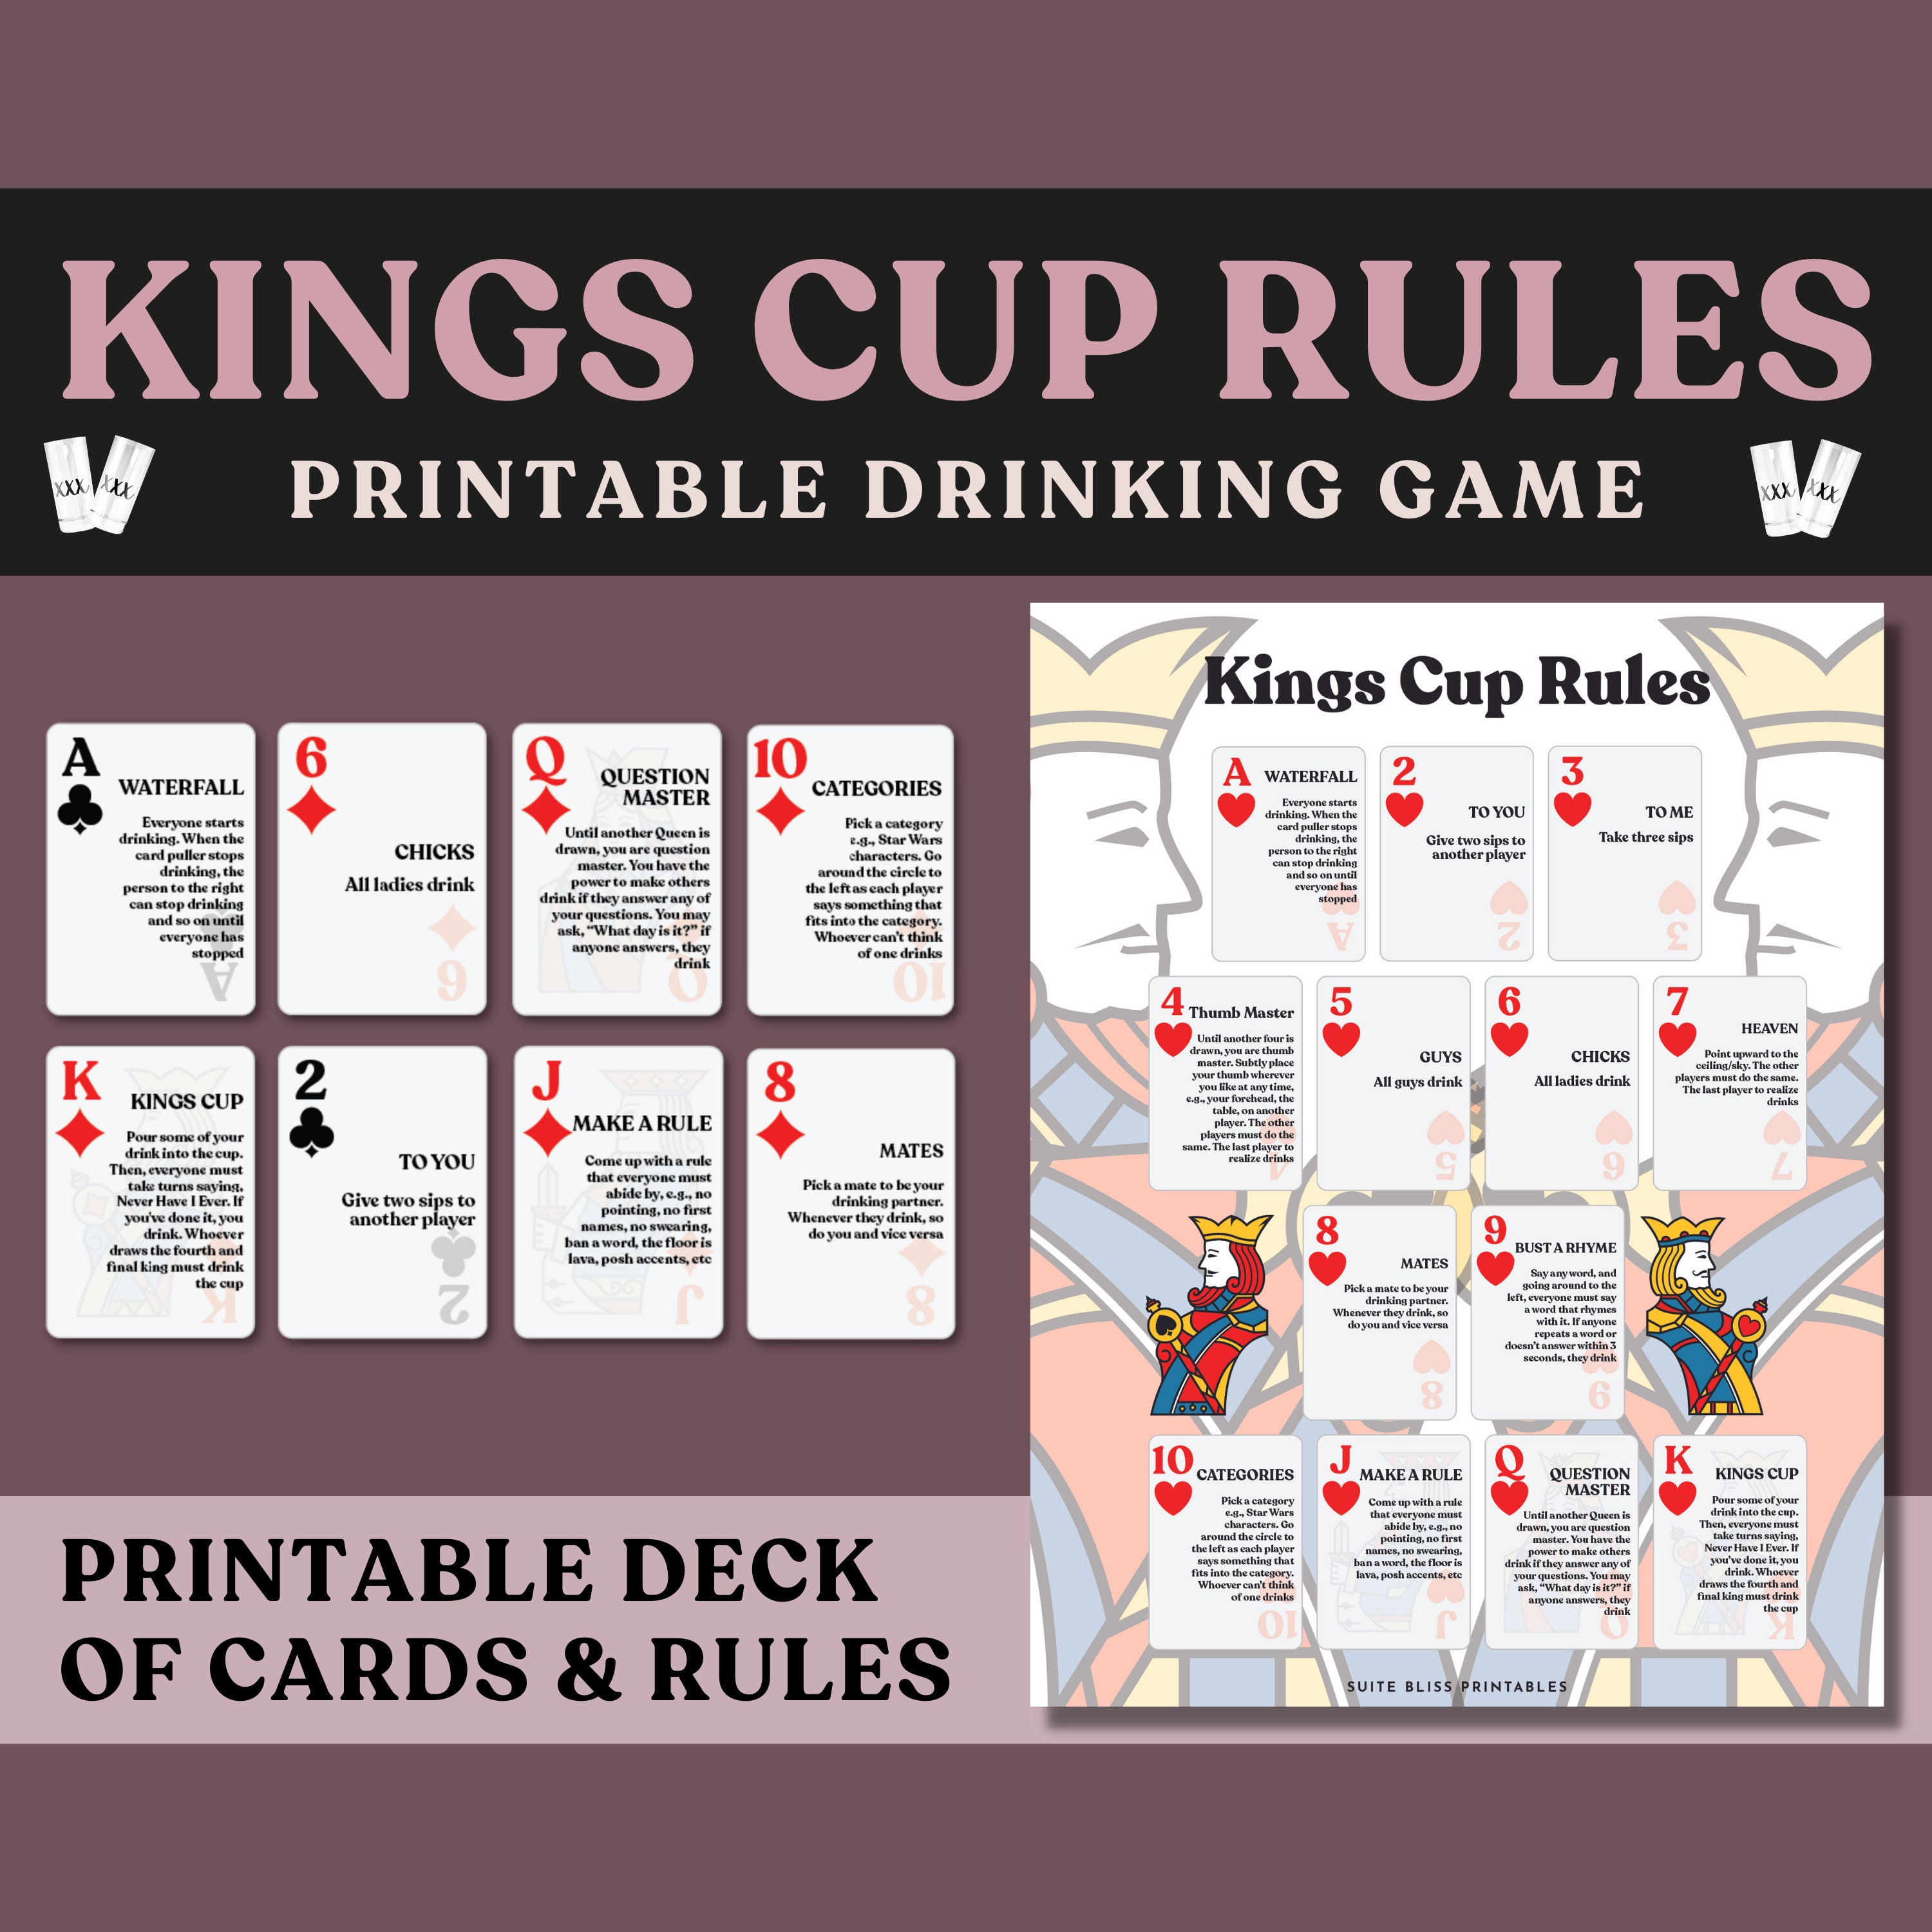 King's Cup (Drinking Game): How to Play & Alternate Rules